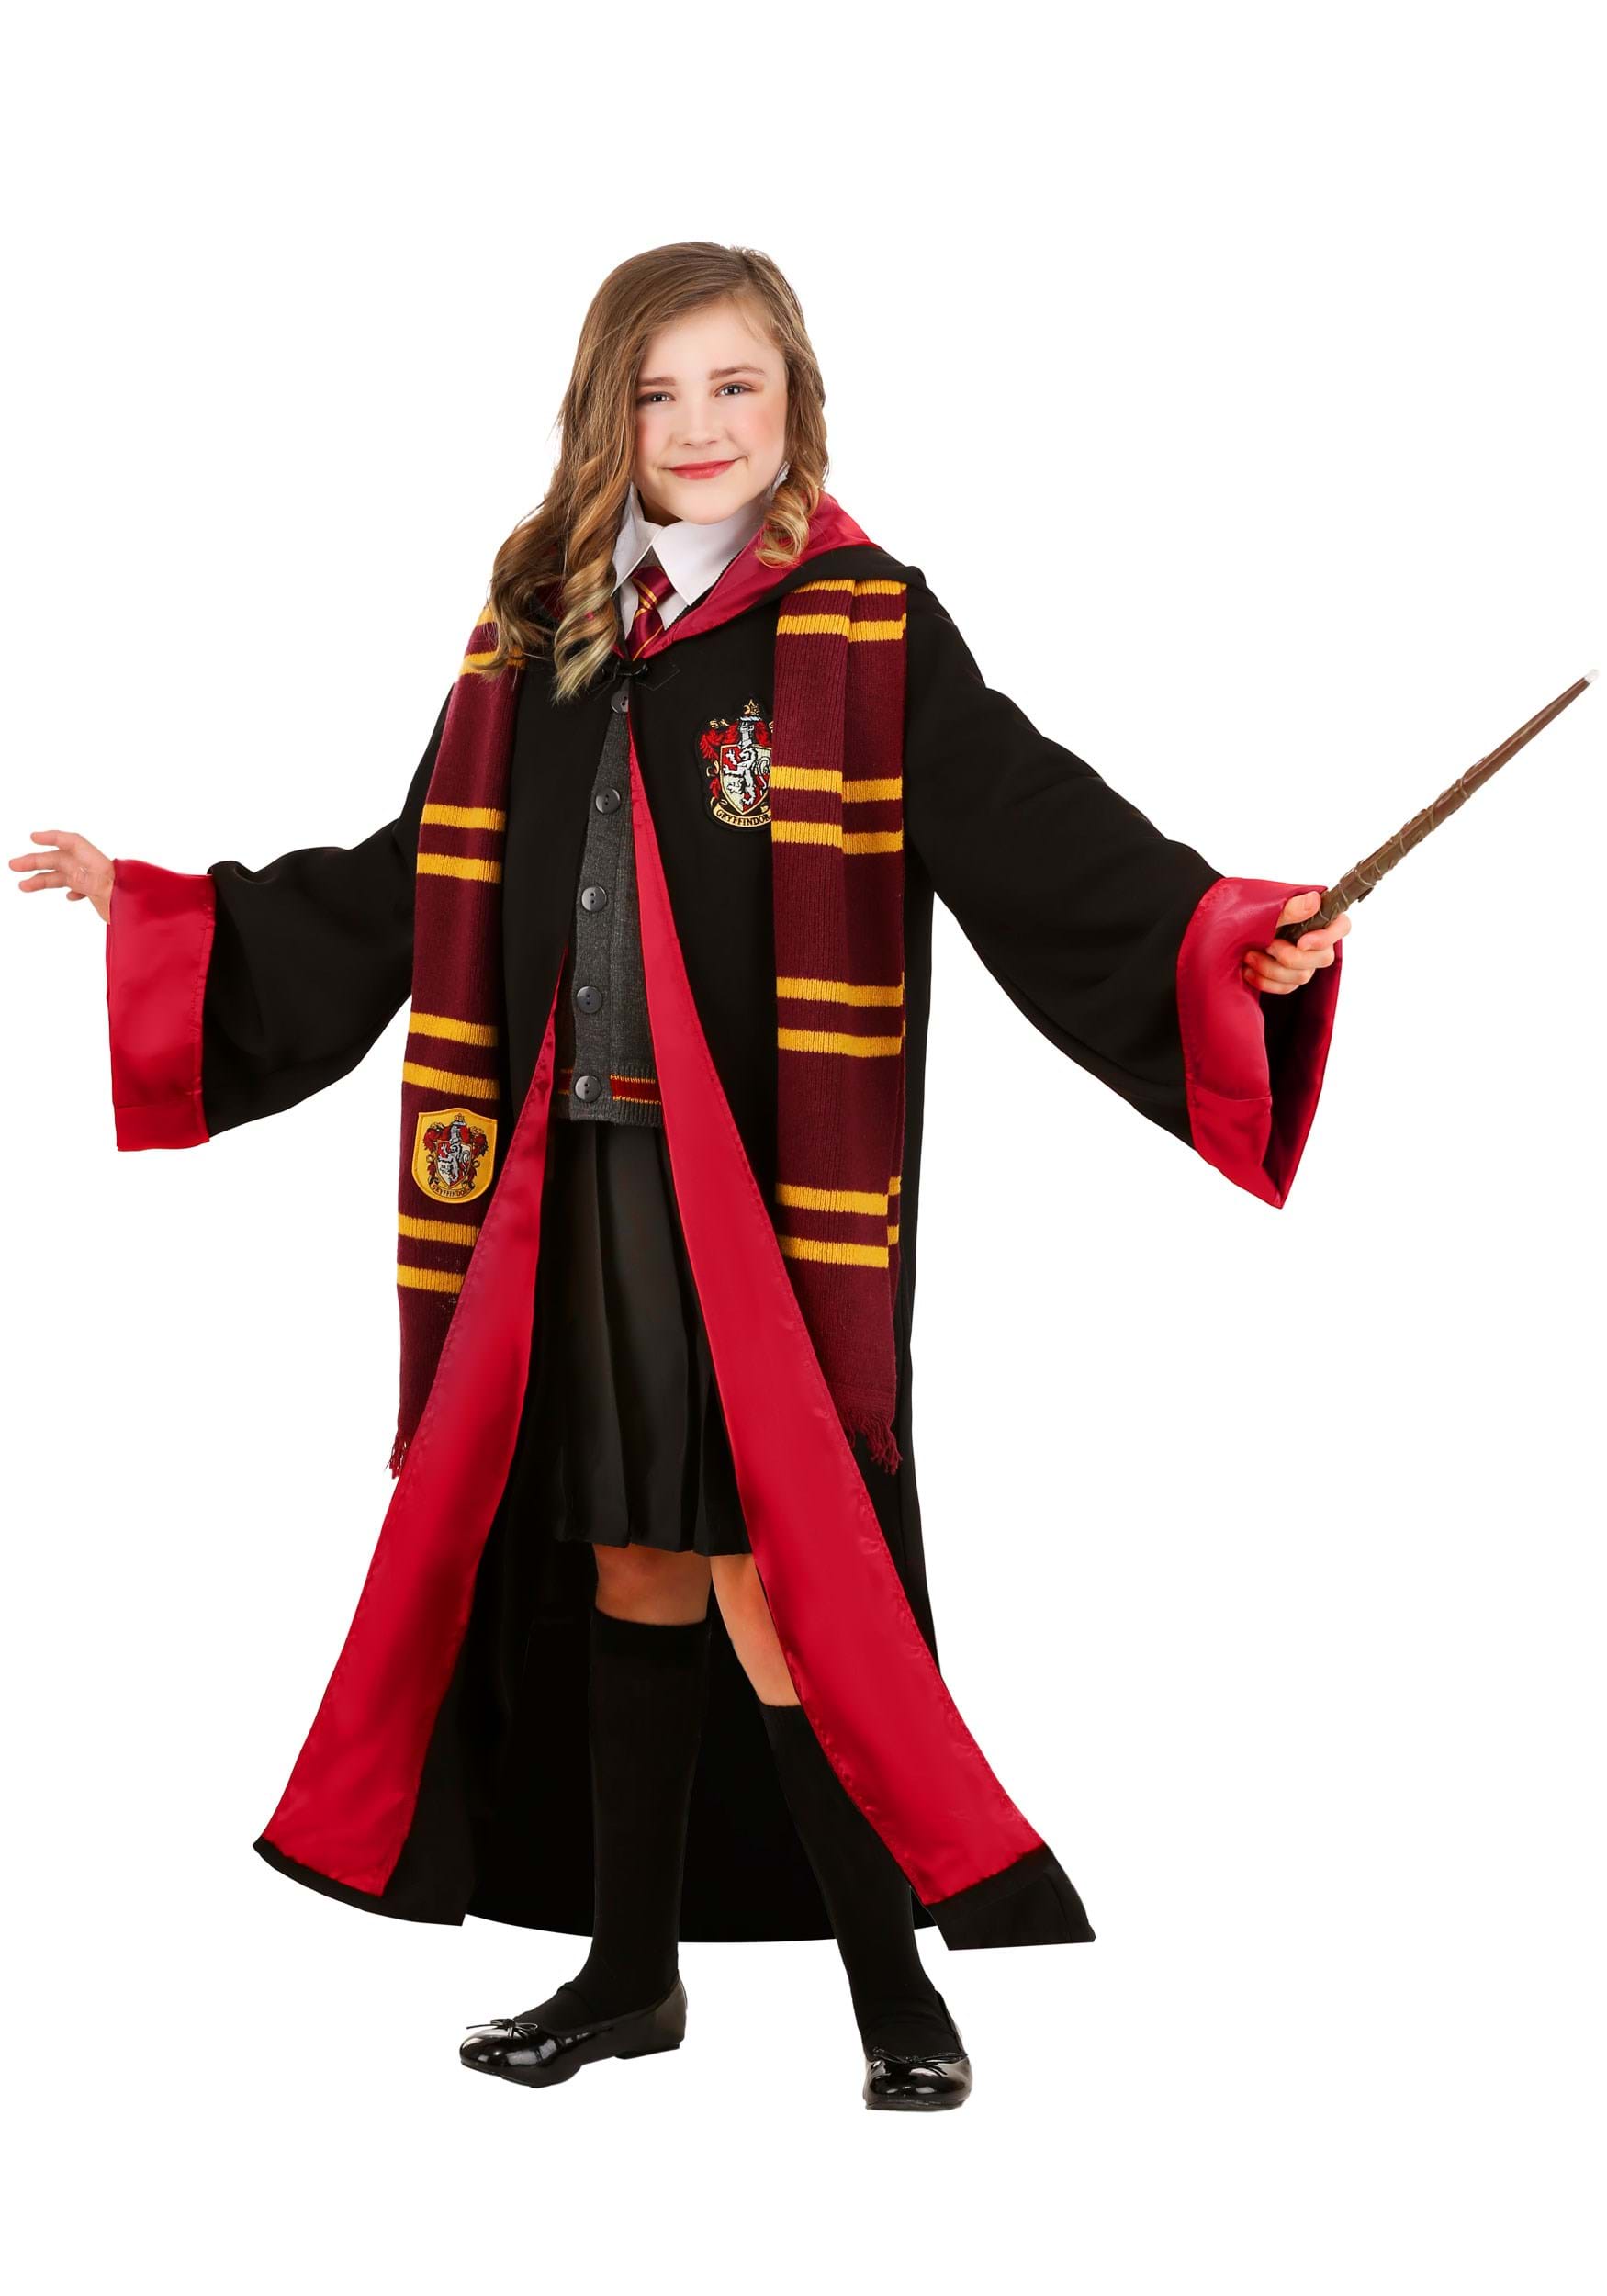 How to make my infant harry potter for halloween | gail's blog